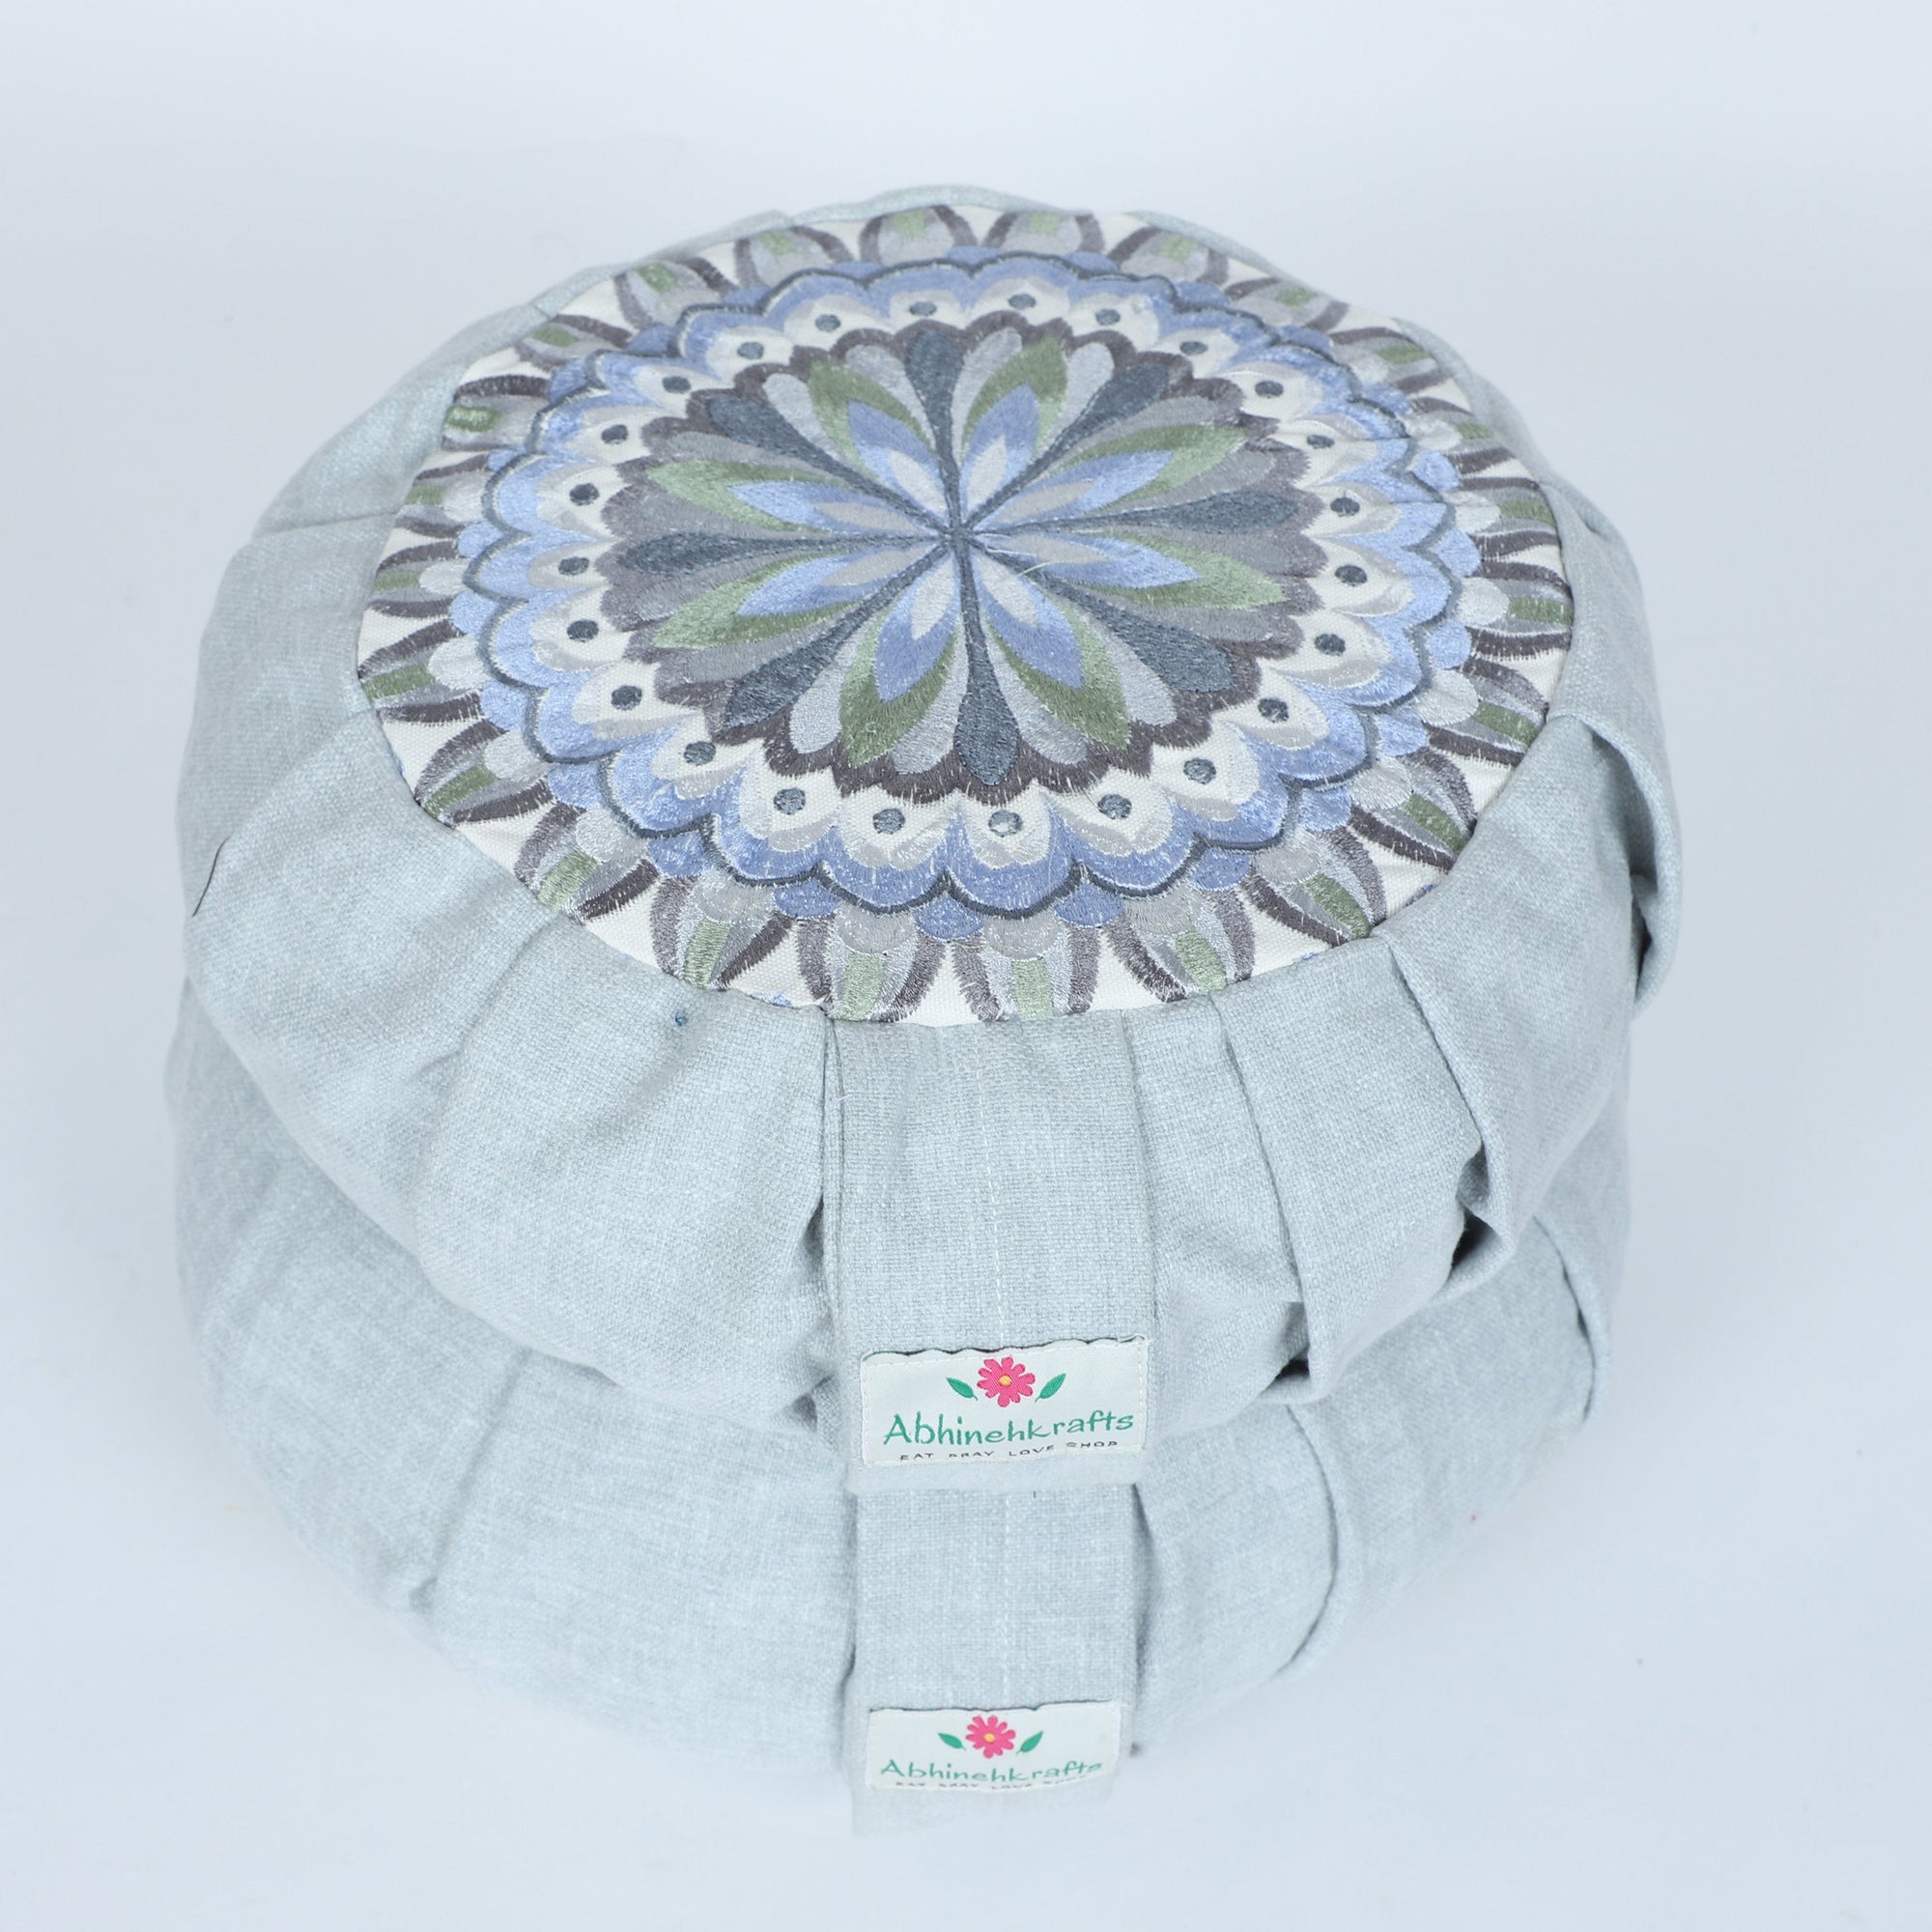 Embroidered Round Zafu Yoga Pillow |Zipped Cover |Washable| Portable - Narmada (Grey on Grey) - Size and Filling Options